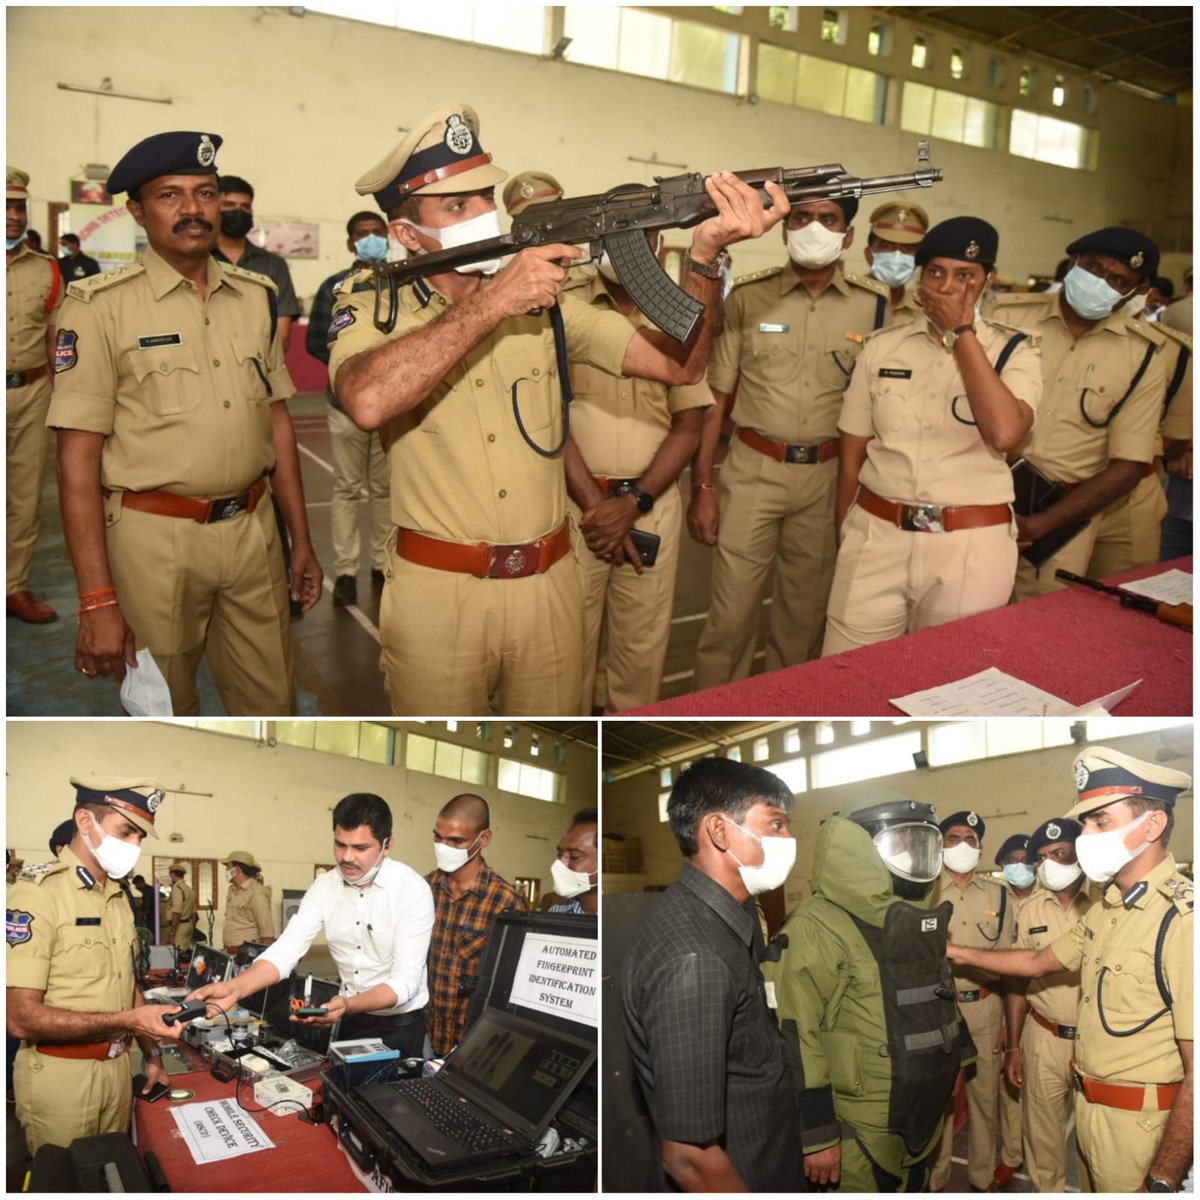 #PoliceFlagDay2021 #TelanganaStatePolice Online Open House Programme was  conducted by Warangal Police at Rudrama Hall, Police Head Quarters. @TelanganaDGP